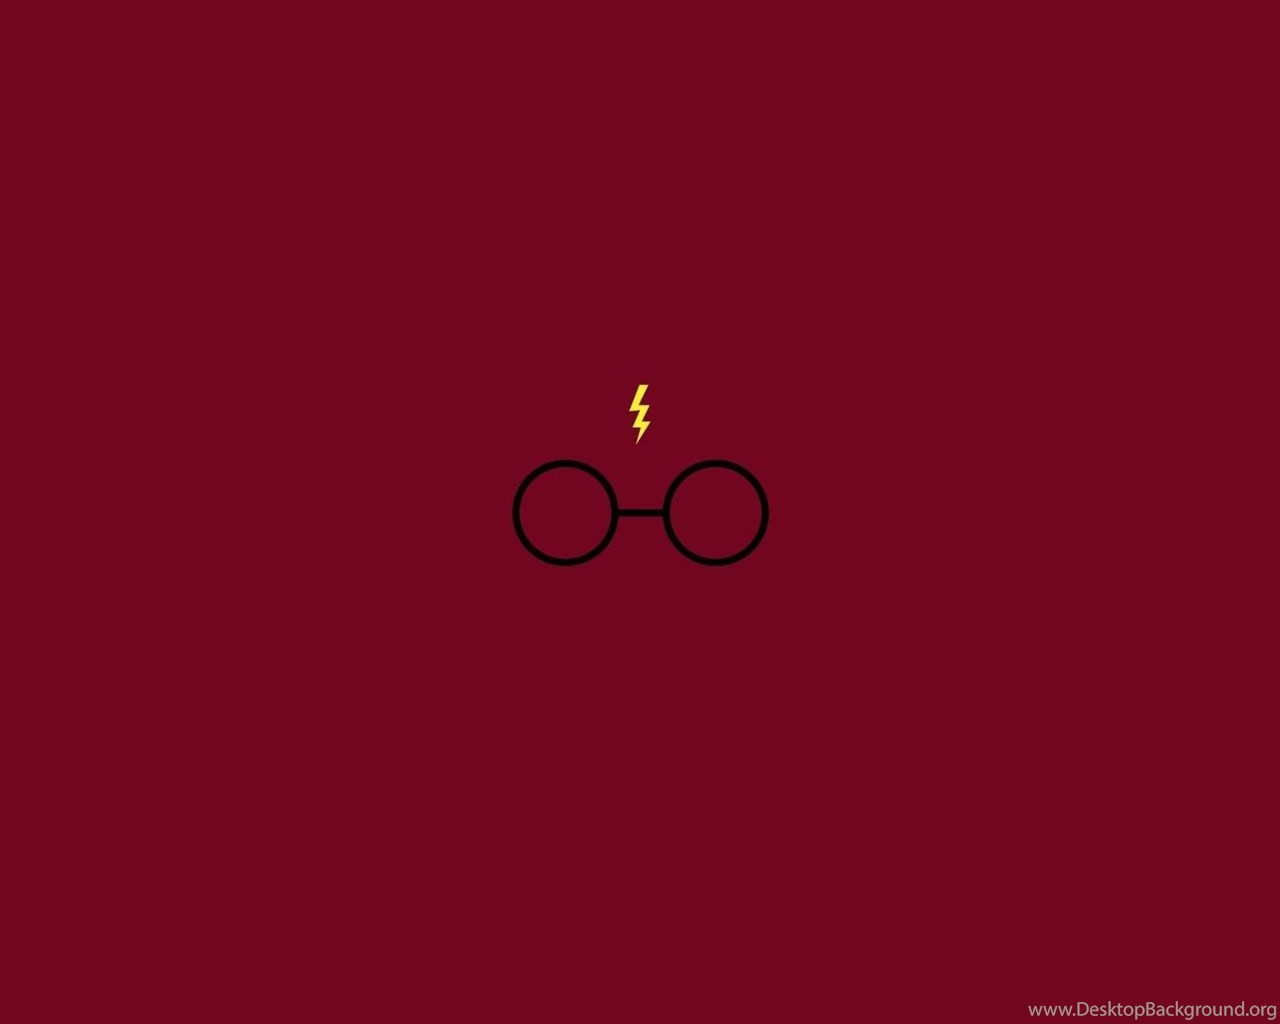 Download 1920x1080 Minimalistic Harry Potter Wallpapers